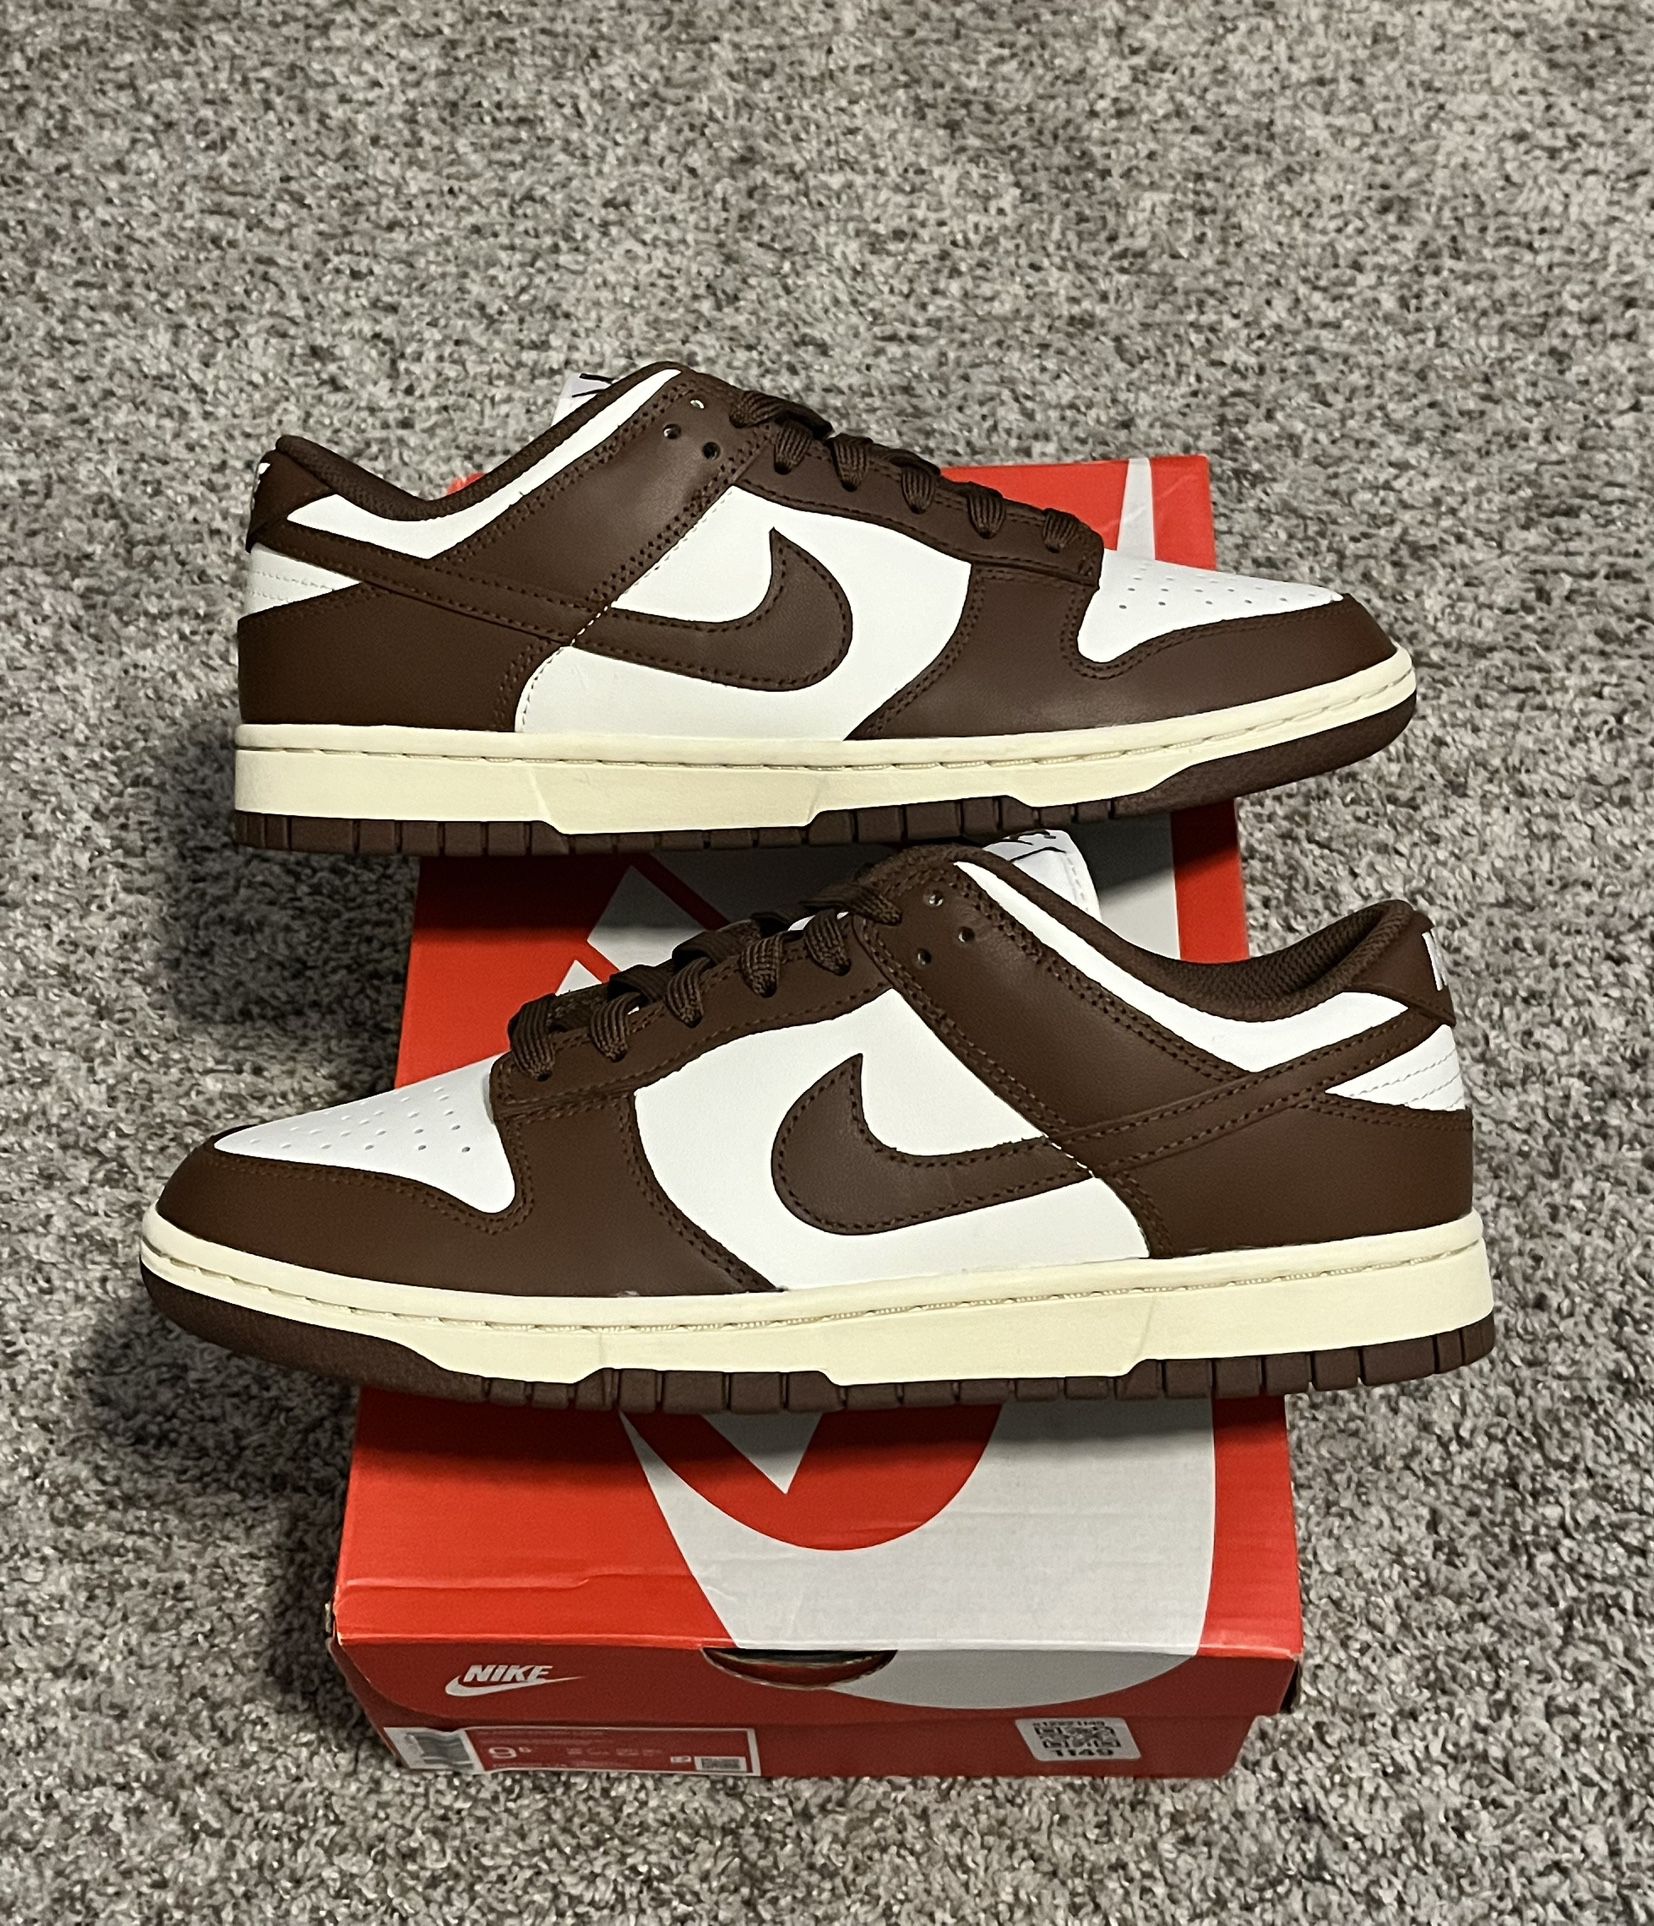 Nike Dunk Low Cacao Wow Brown - Size 8m/9.5w Brand New